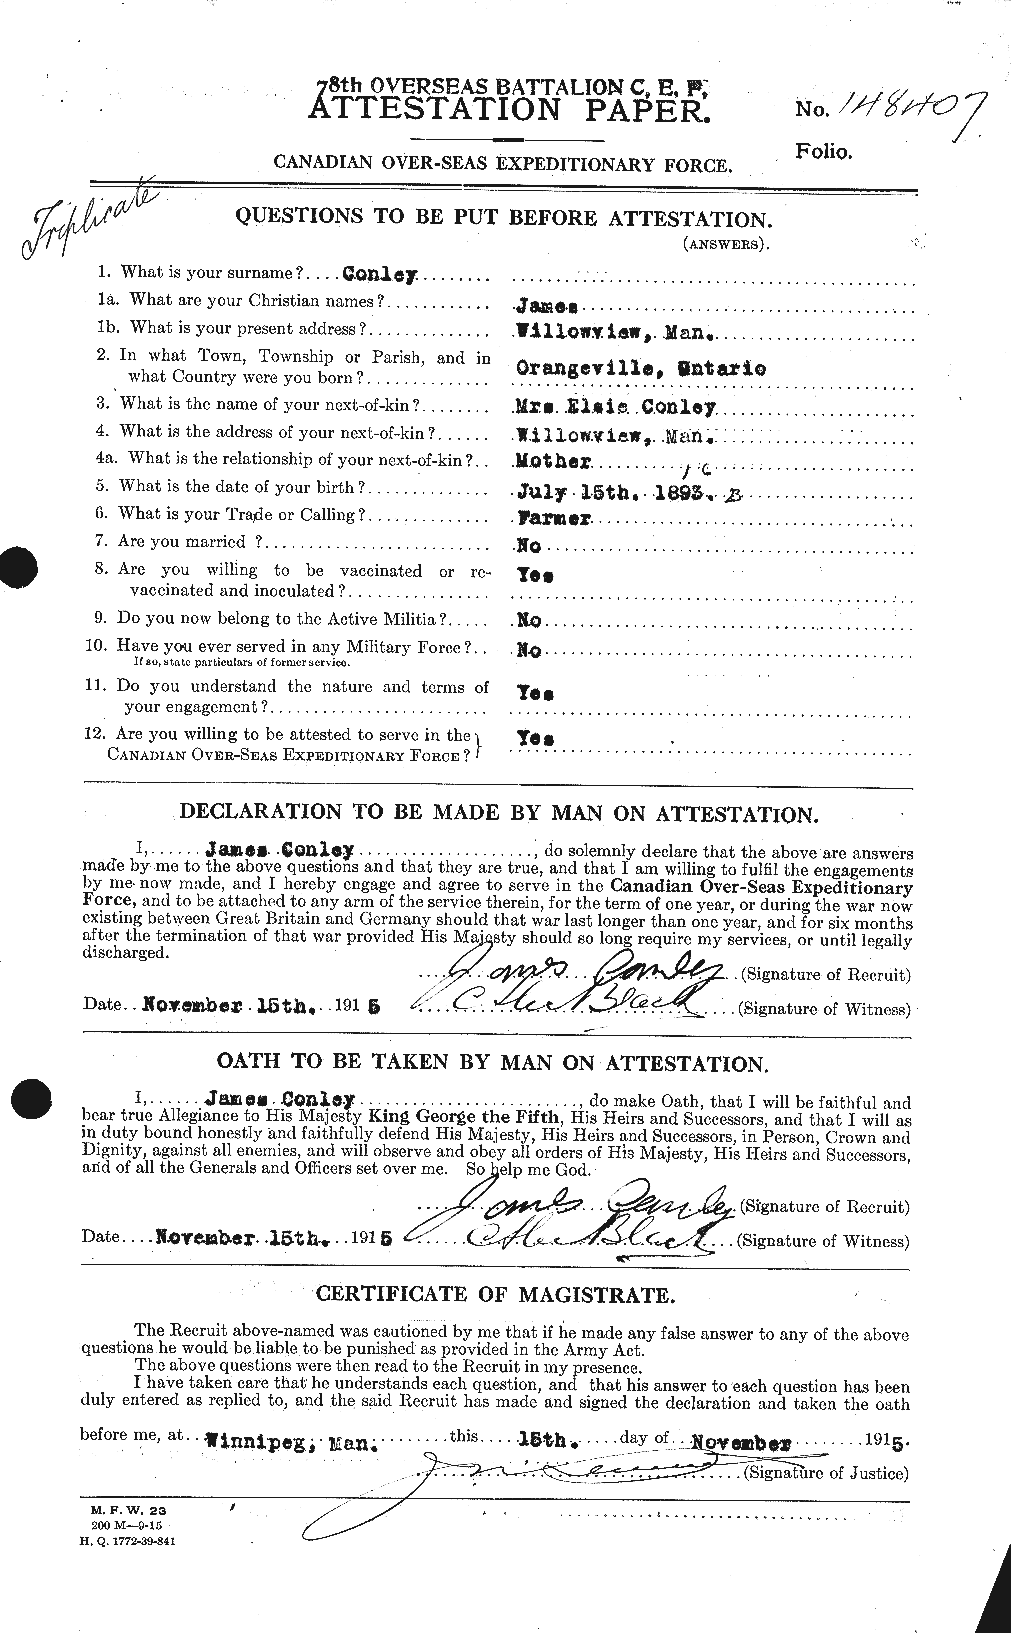 Personnel Records of the First World War - CEF 067825a